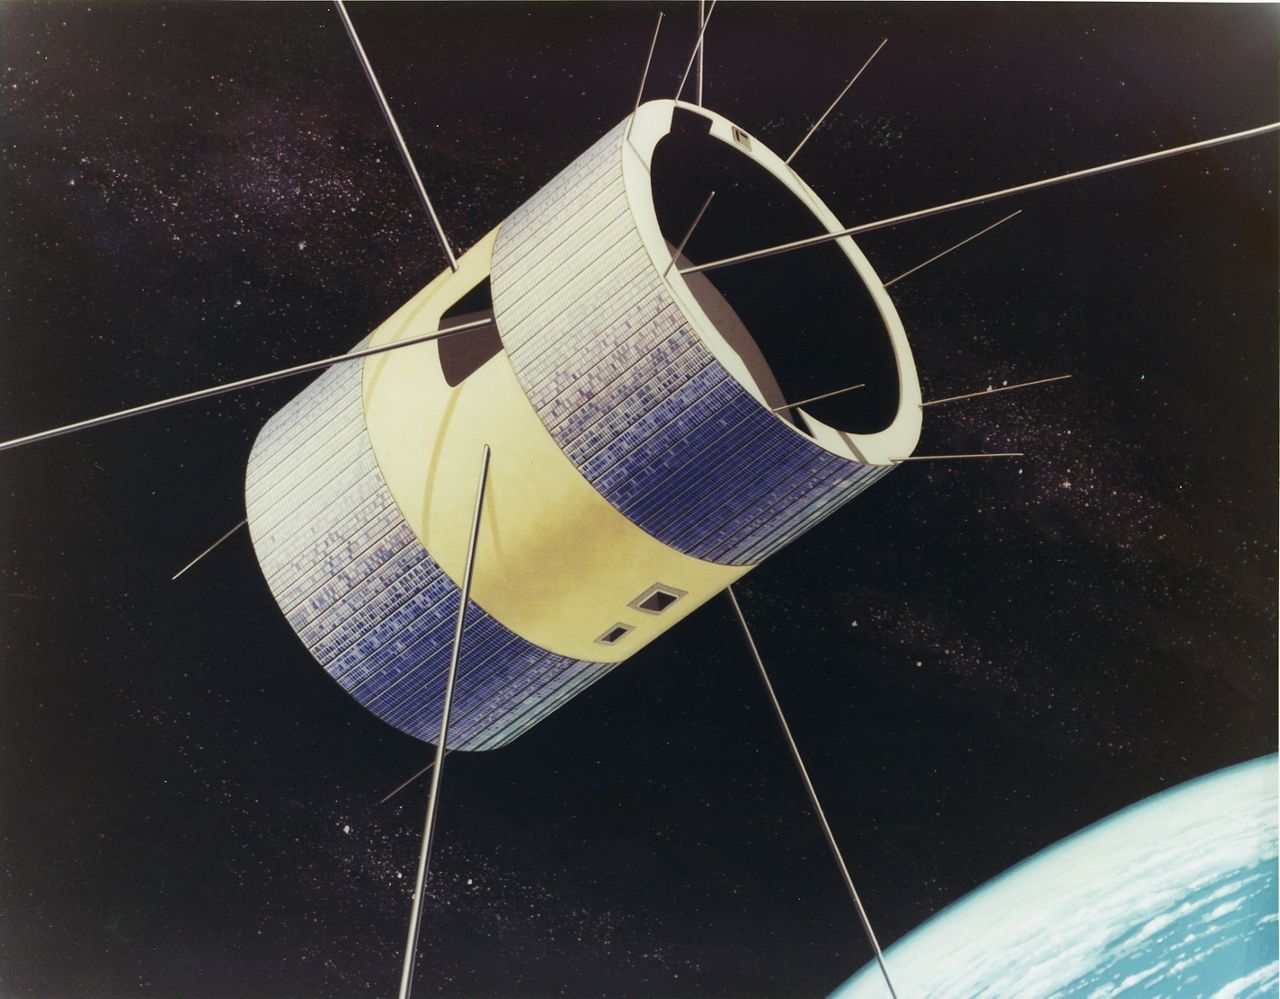 The Applications Technology Satellite (ATS-1) was the first geosynchronous satellite which helped meteorologists determine weather patterns since photos of the same area of the earth were taken as often as every 30 minutes showing the changes in cloud cover.